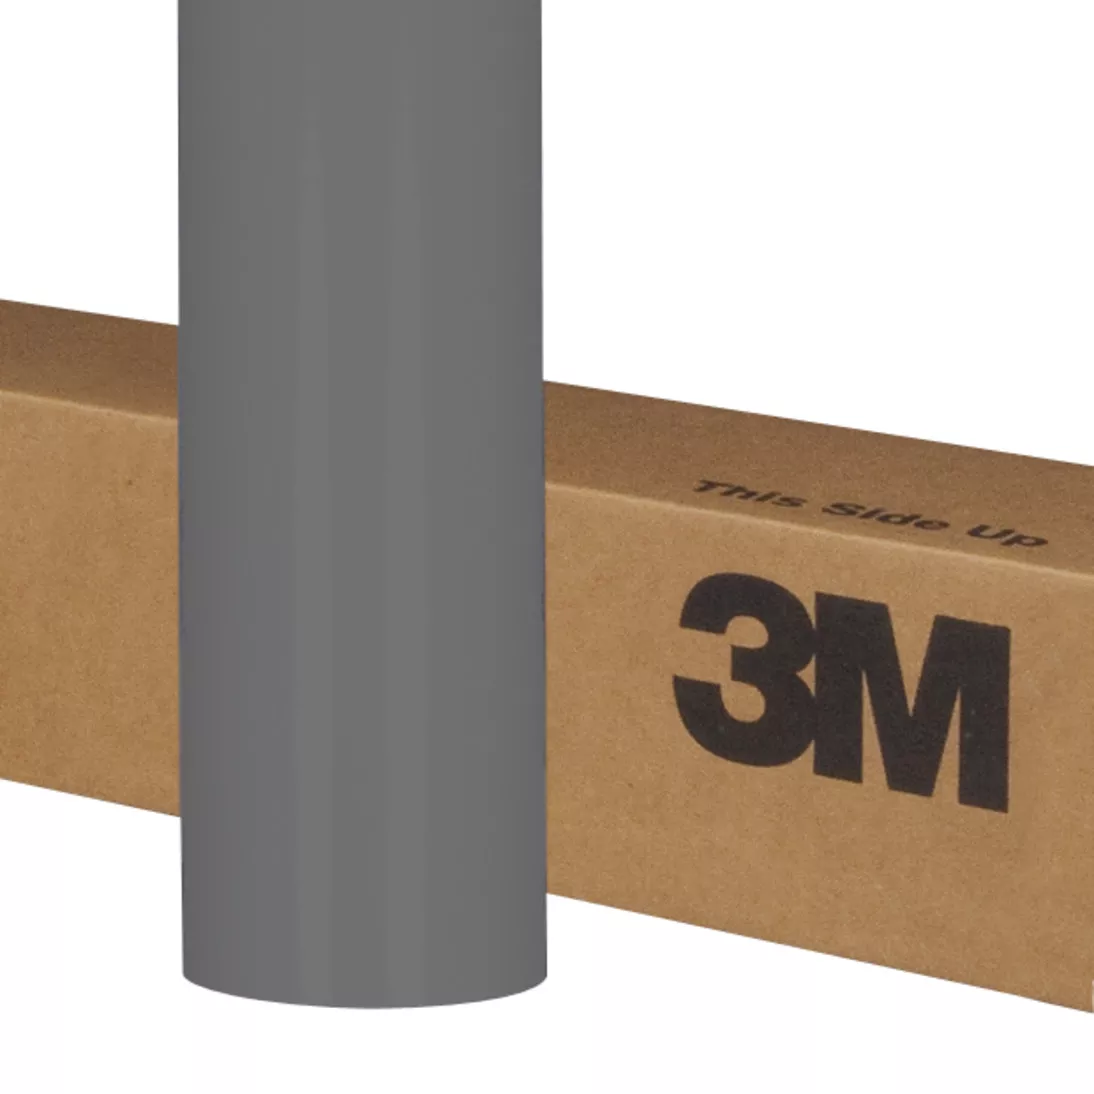 3M™ Controltac™ Graphic Film with Comply™ Adhesive 180mC-0305, Gray, 36
in x 100 yd, 1 Roll/Case